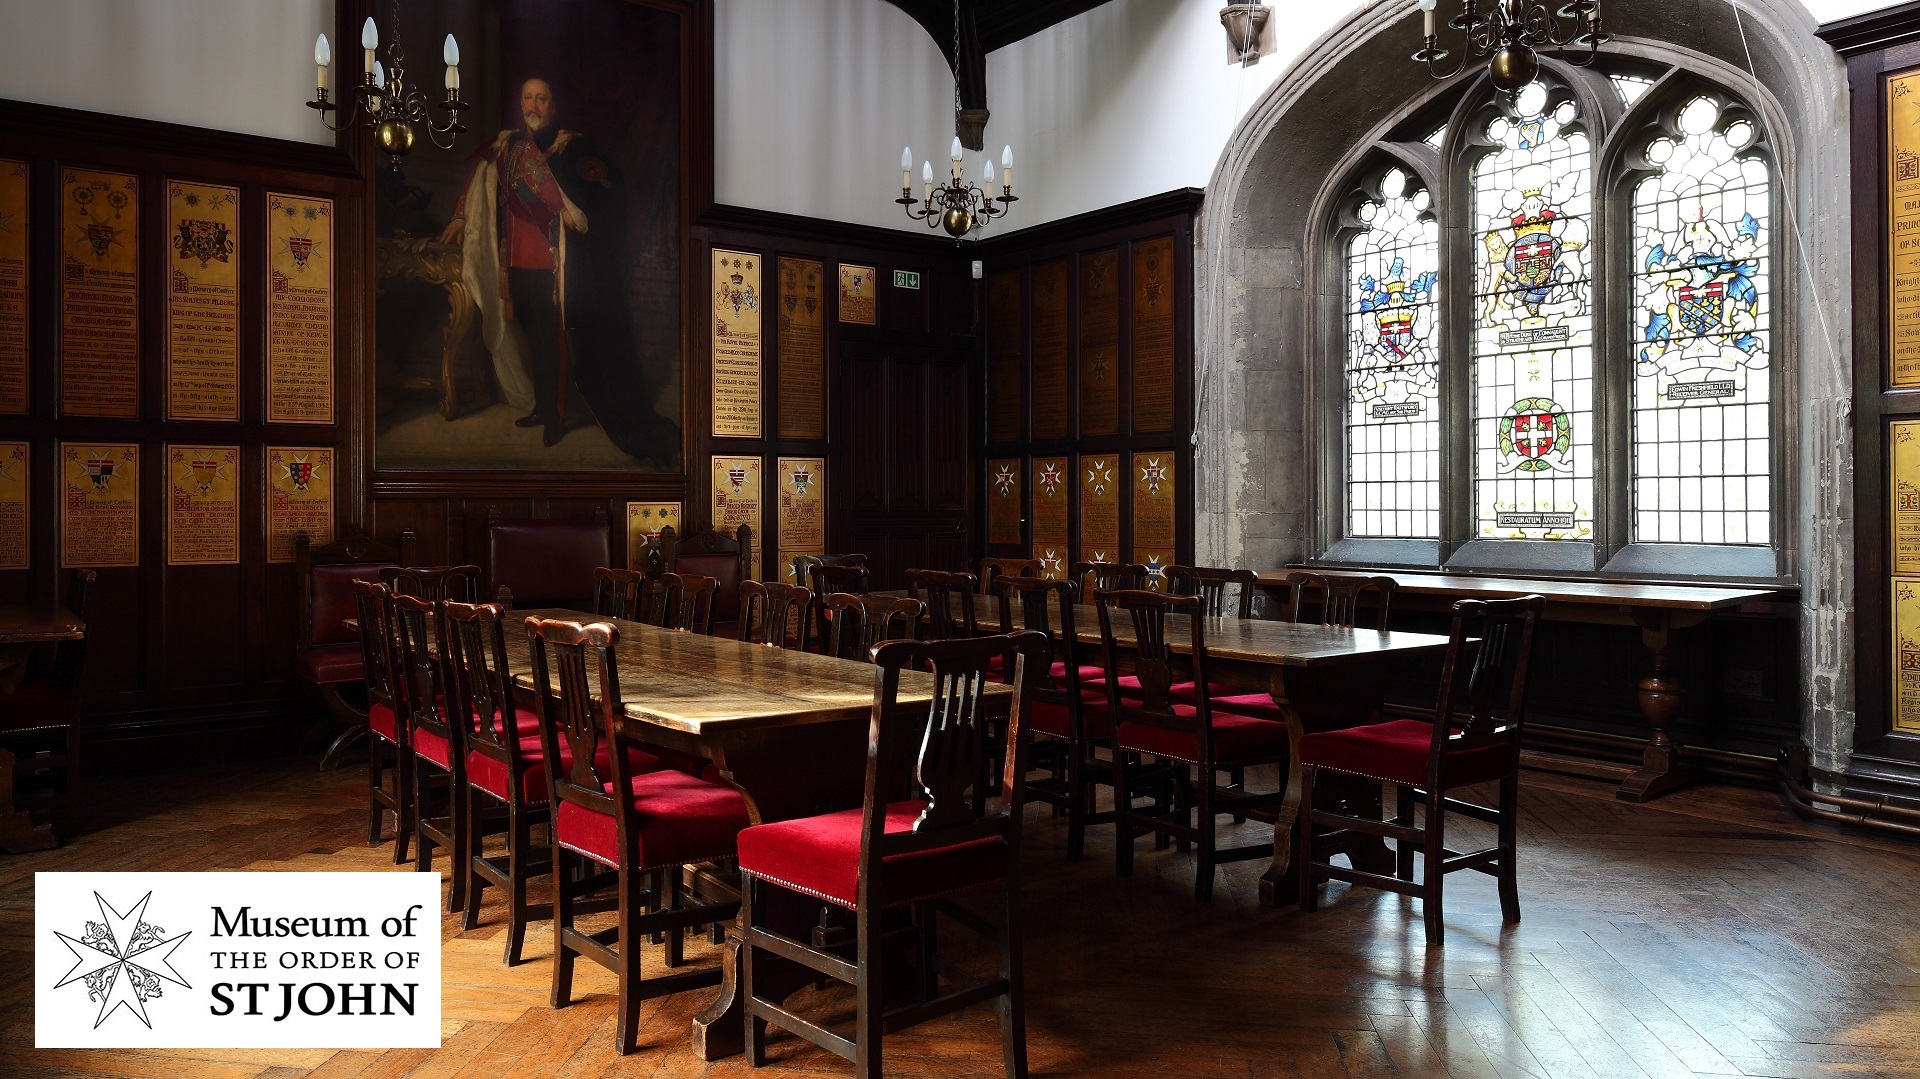 Photograph of a panelled room with a portrait oil painting on one wall and stained glass windows in another.